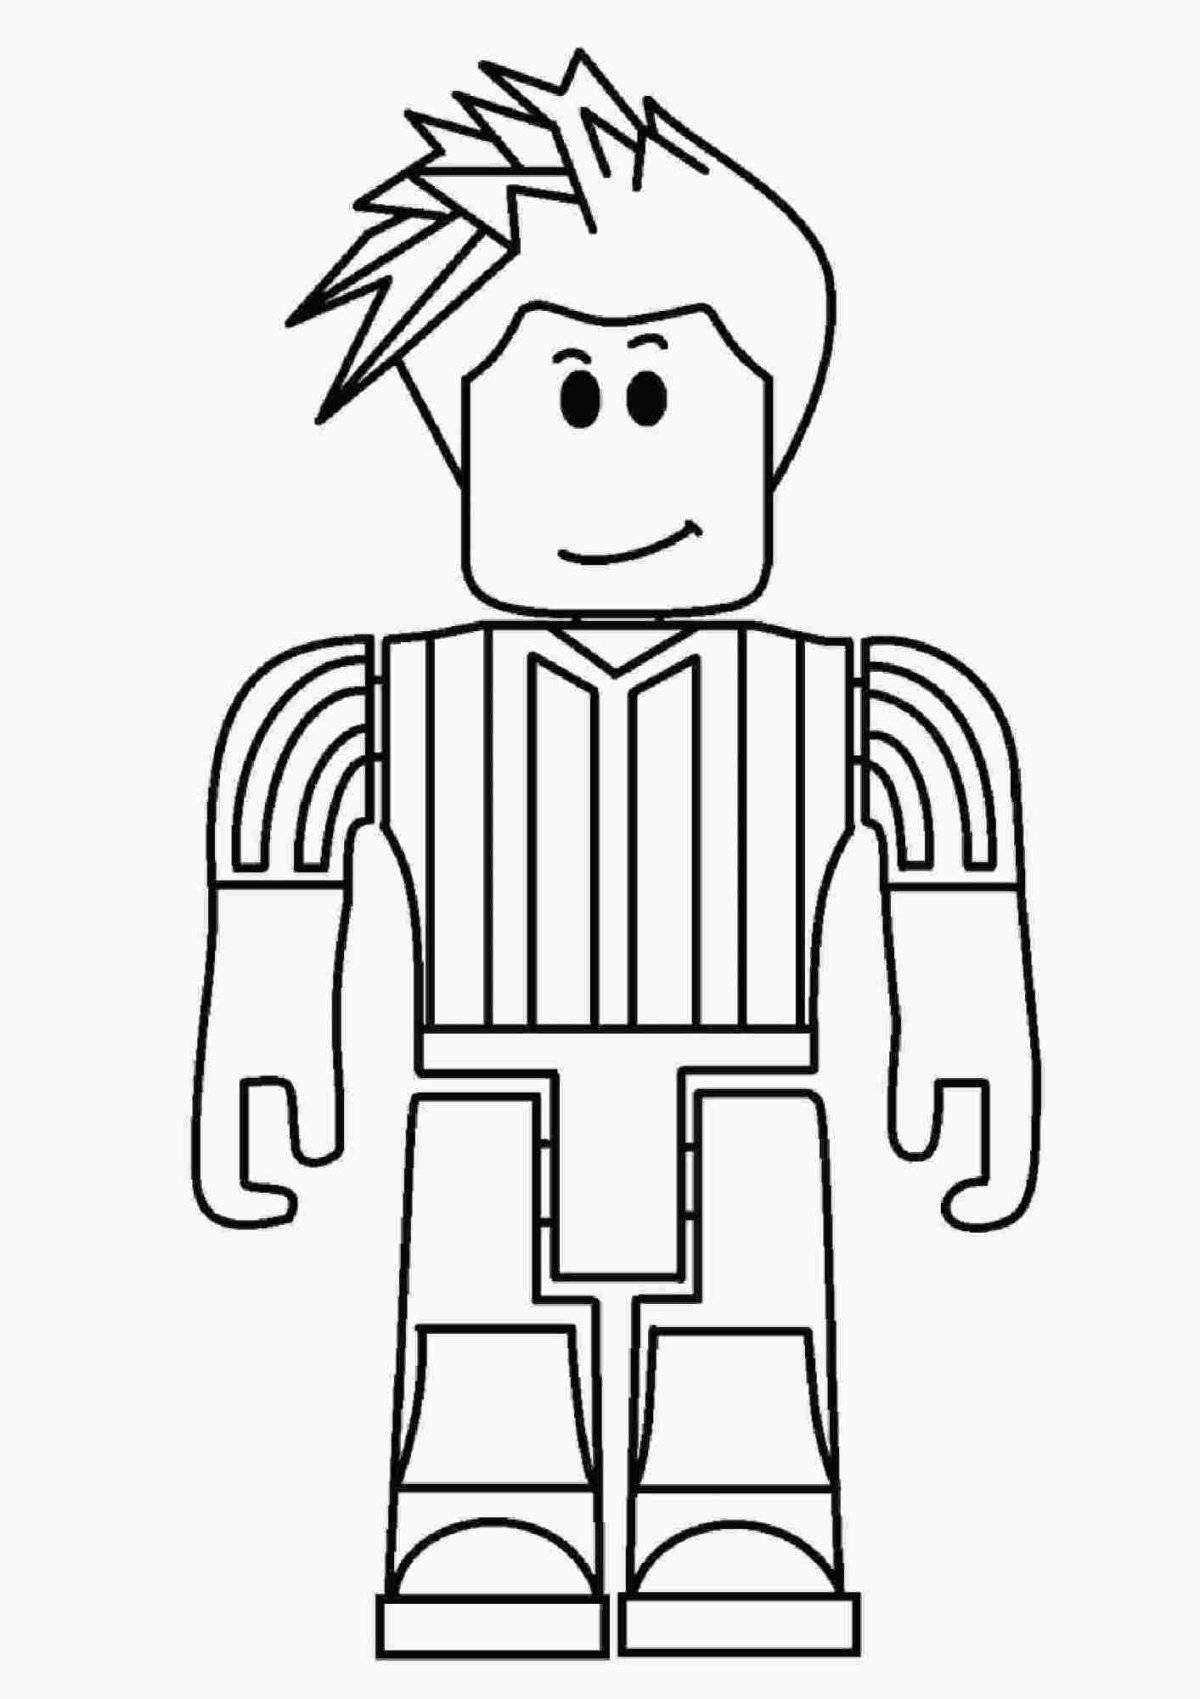 Roblox colorful coloring page